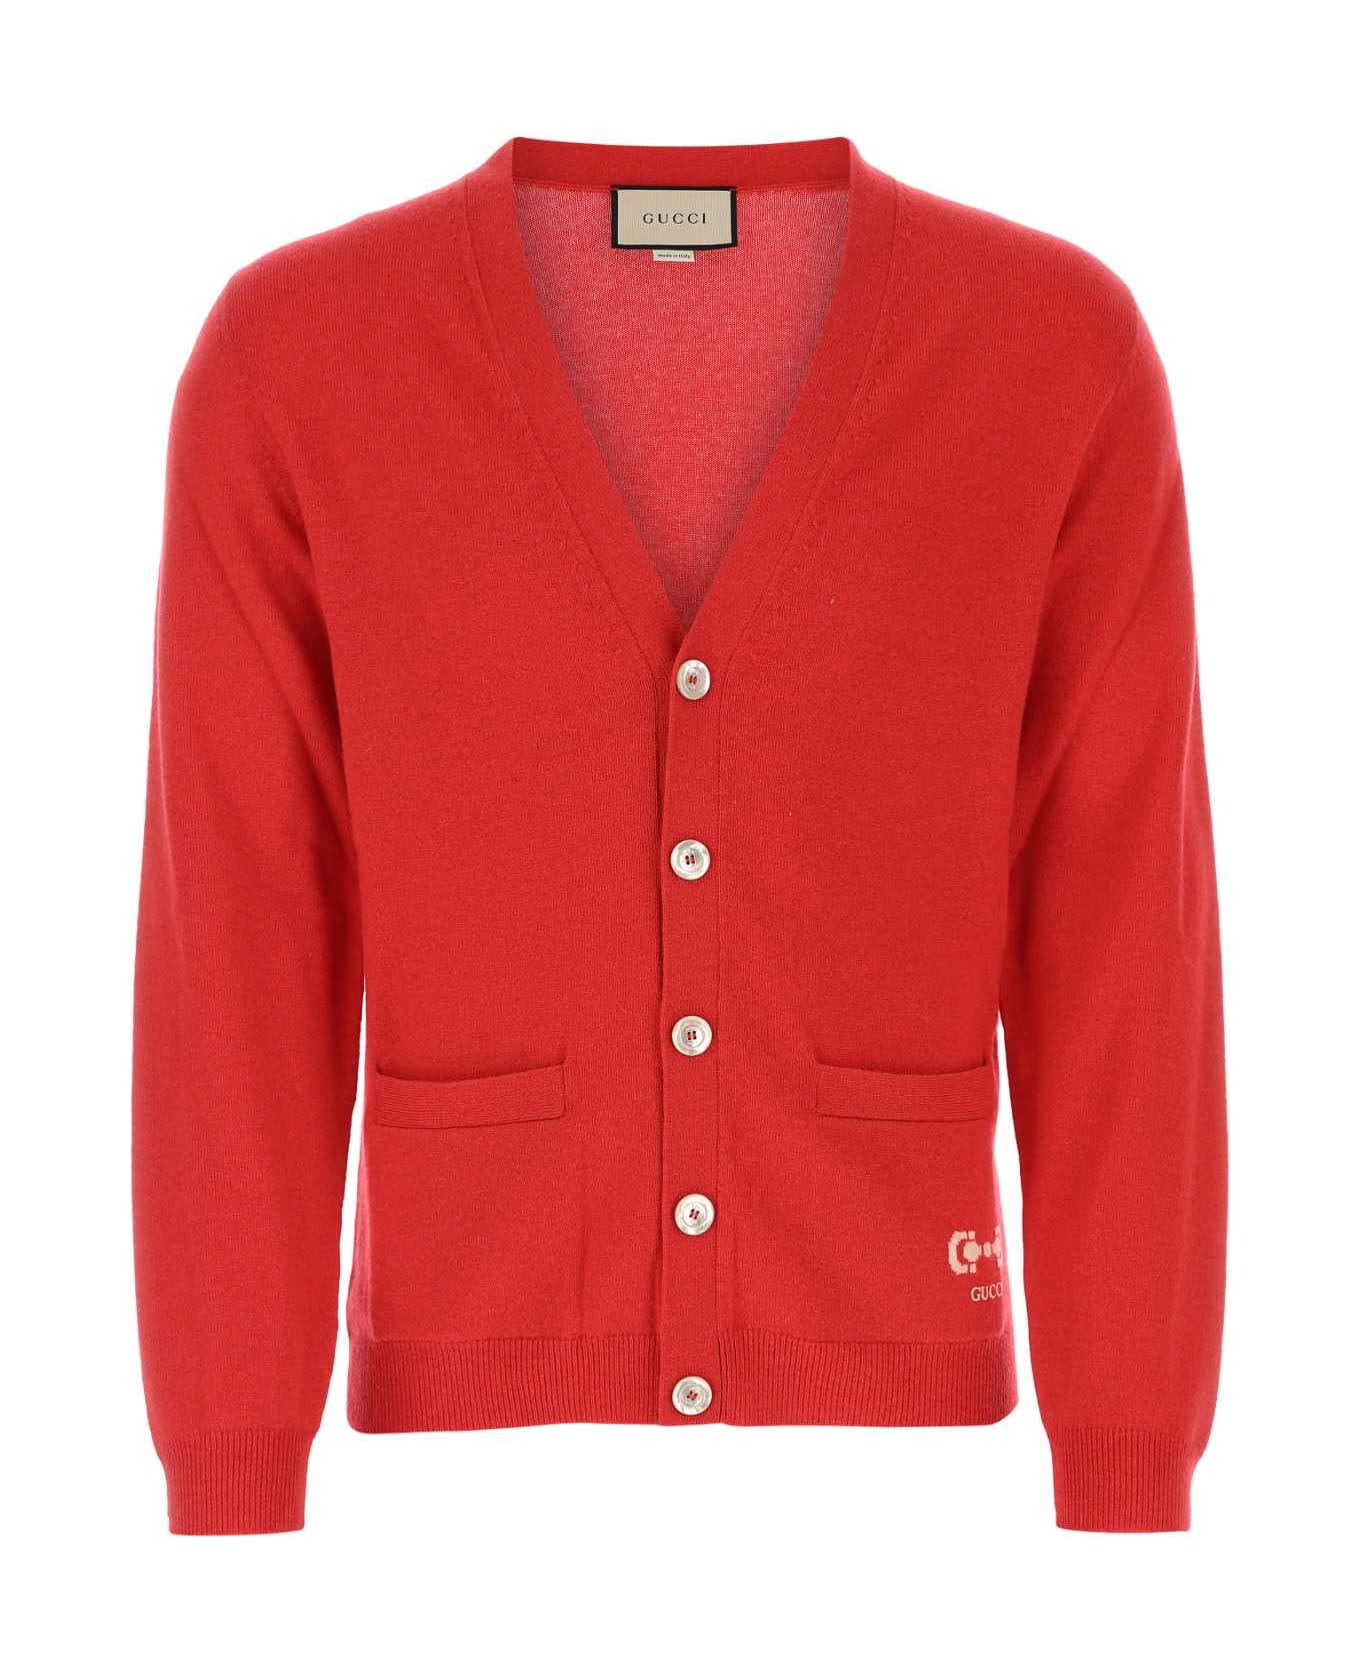 Gucci Red Cashmere Cardigan - Red